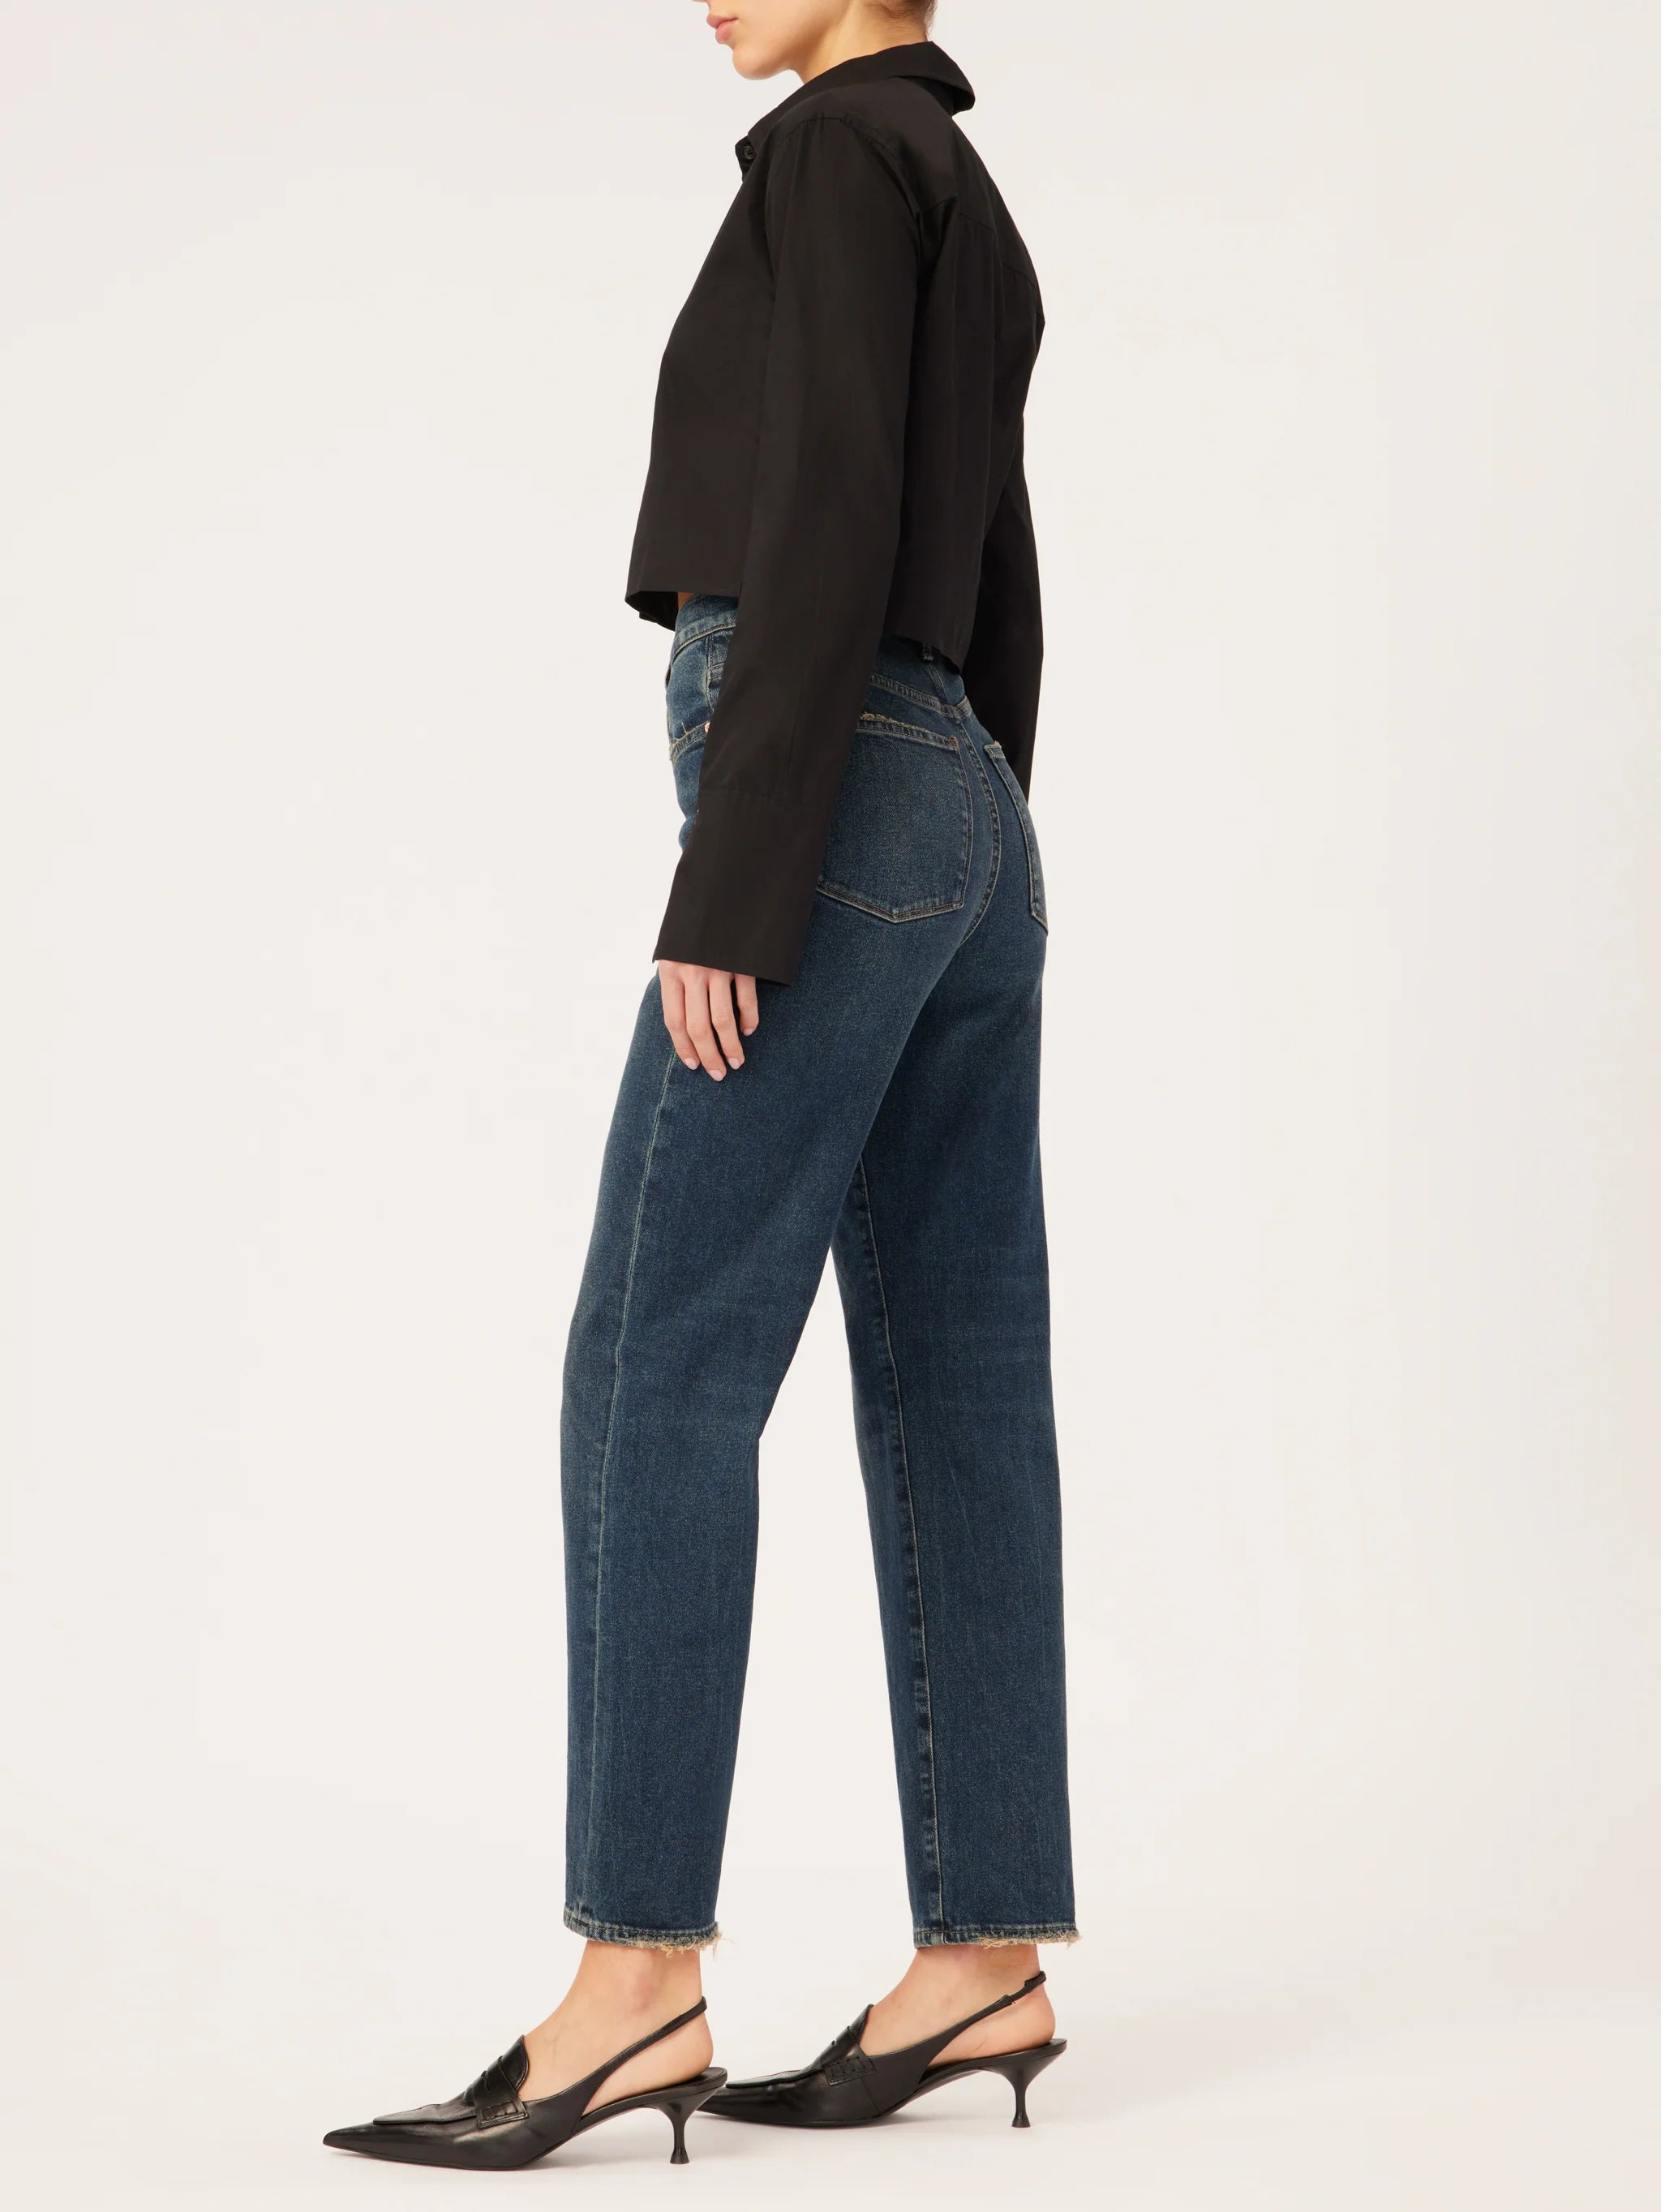 The back view of a woman wearing DL1961 Enora Cigarette High Rise - Broadbay jeans and a black jacket with an ultra high-rise and 29" inseam.